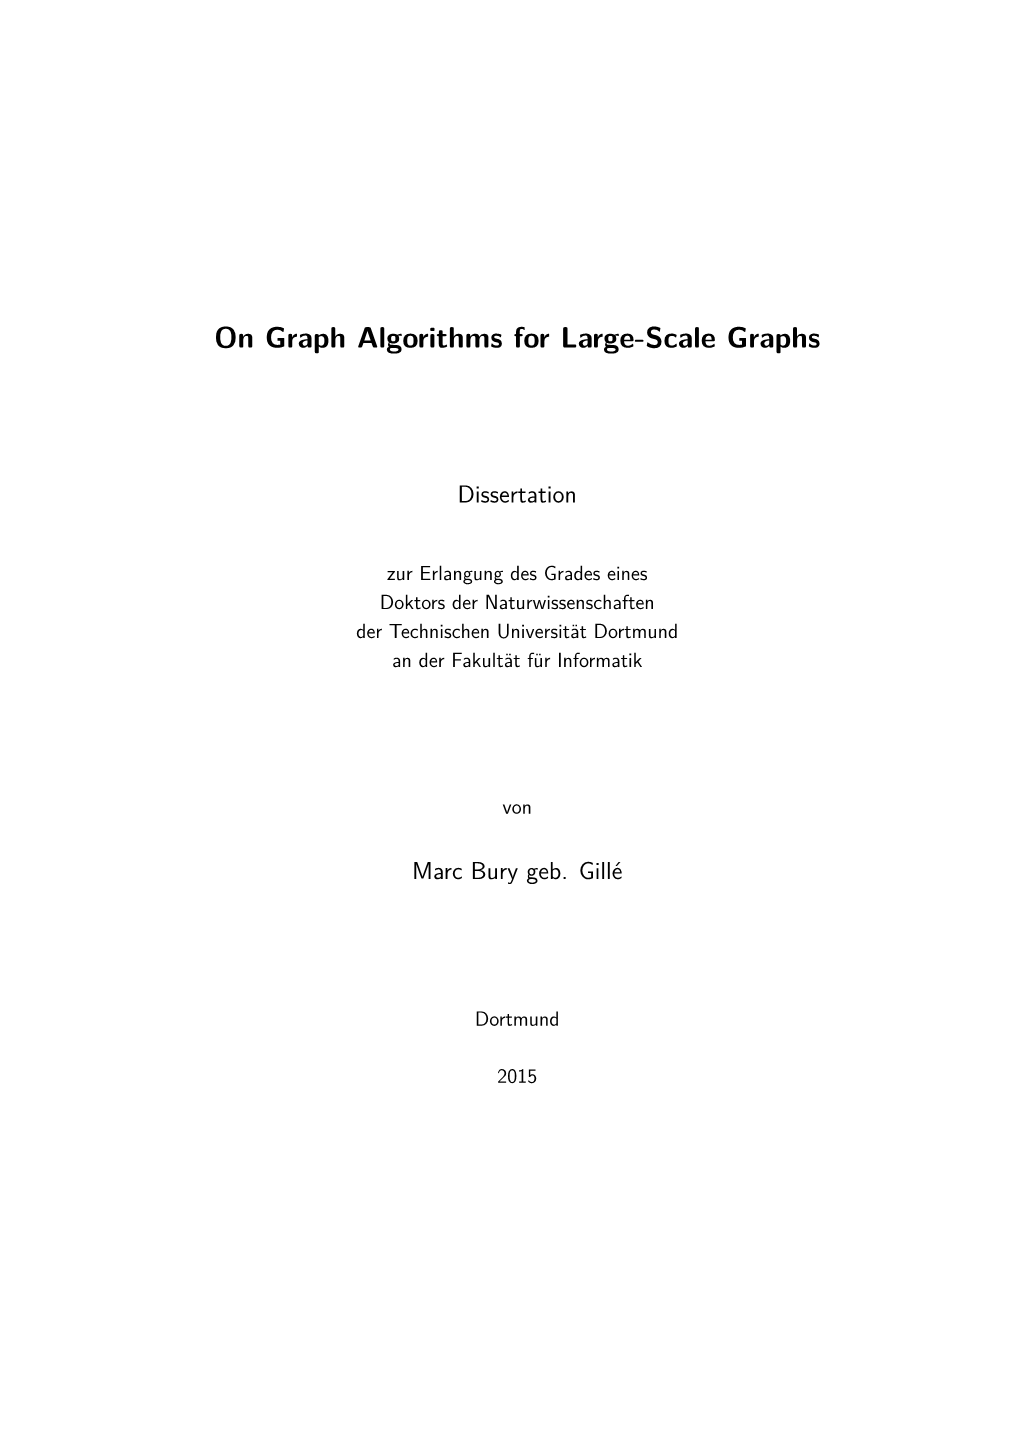 On Graph Algorithms for Large-Scale Graphs